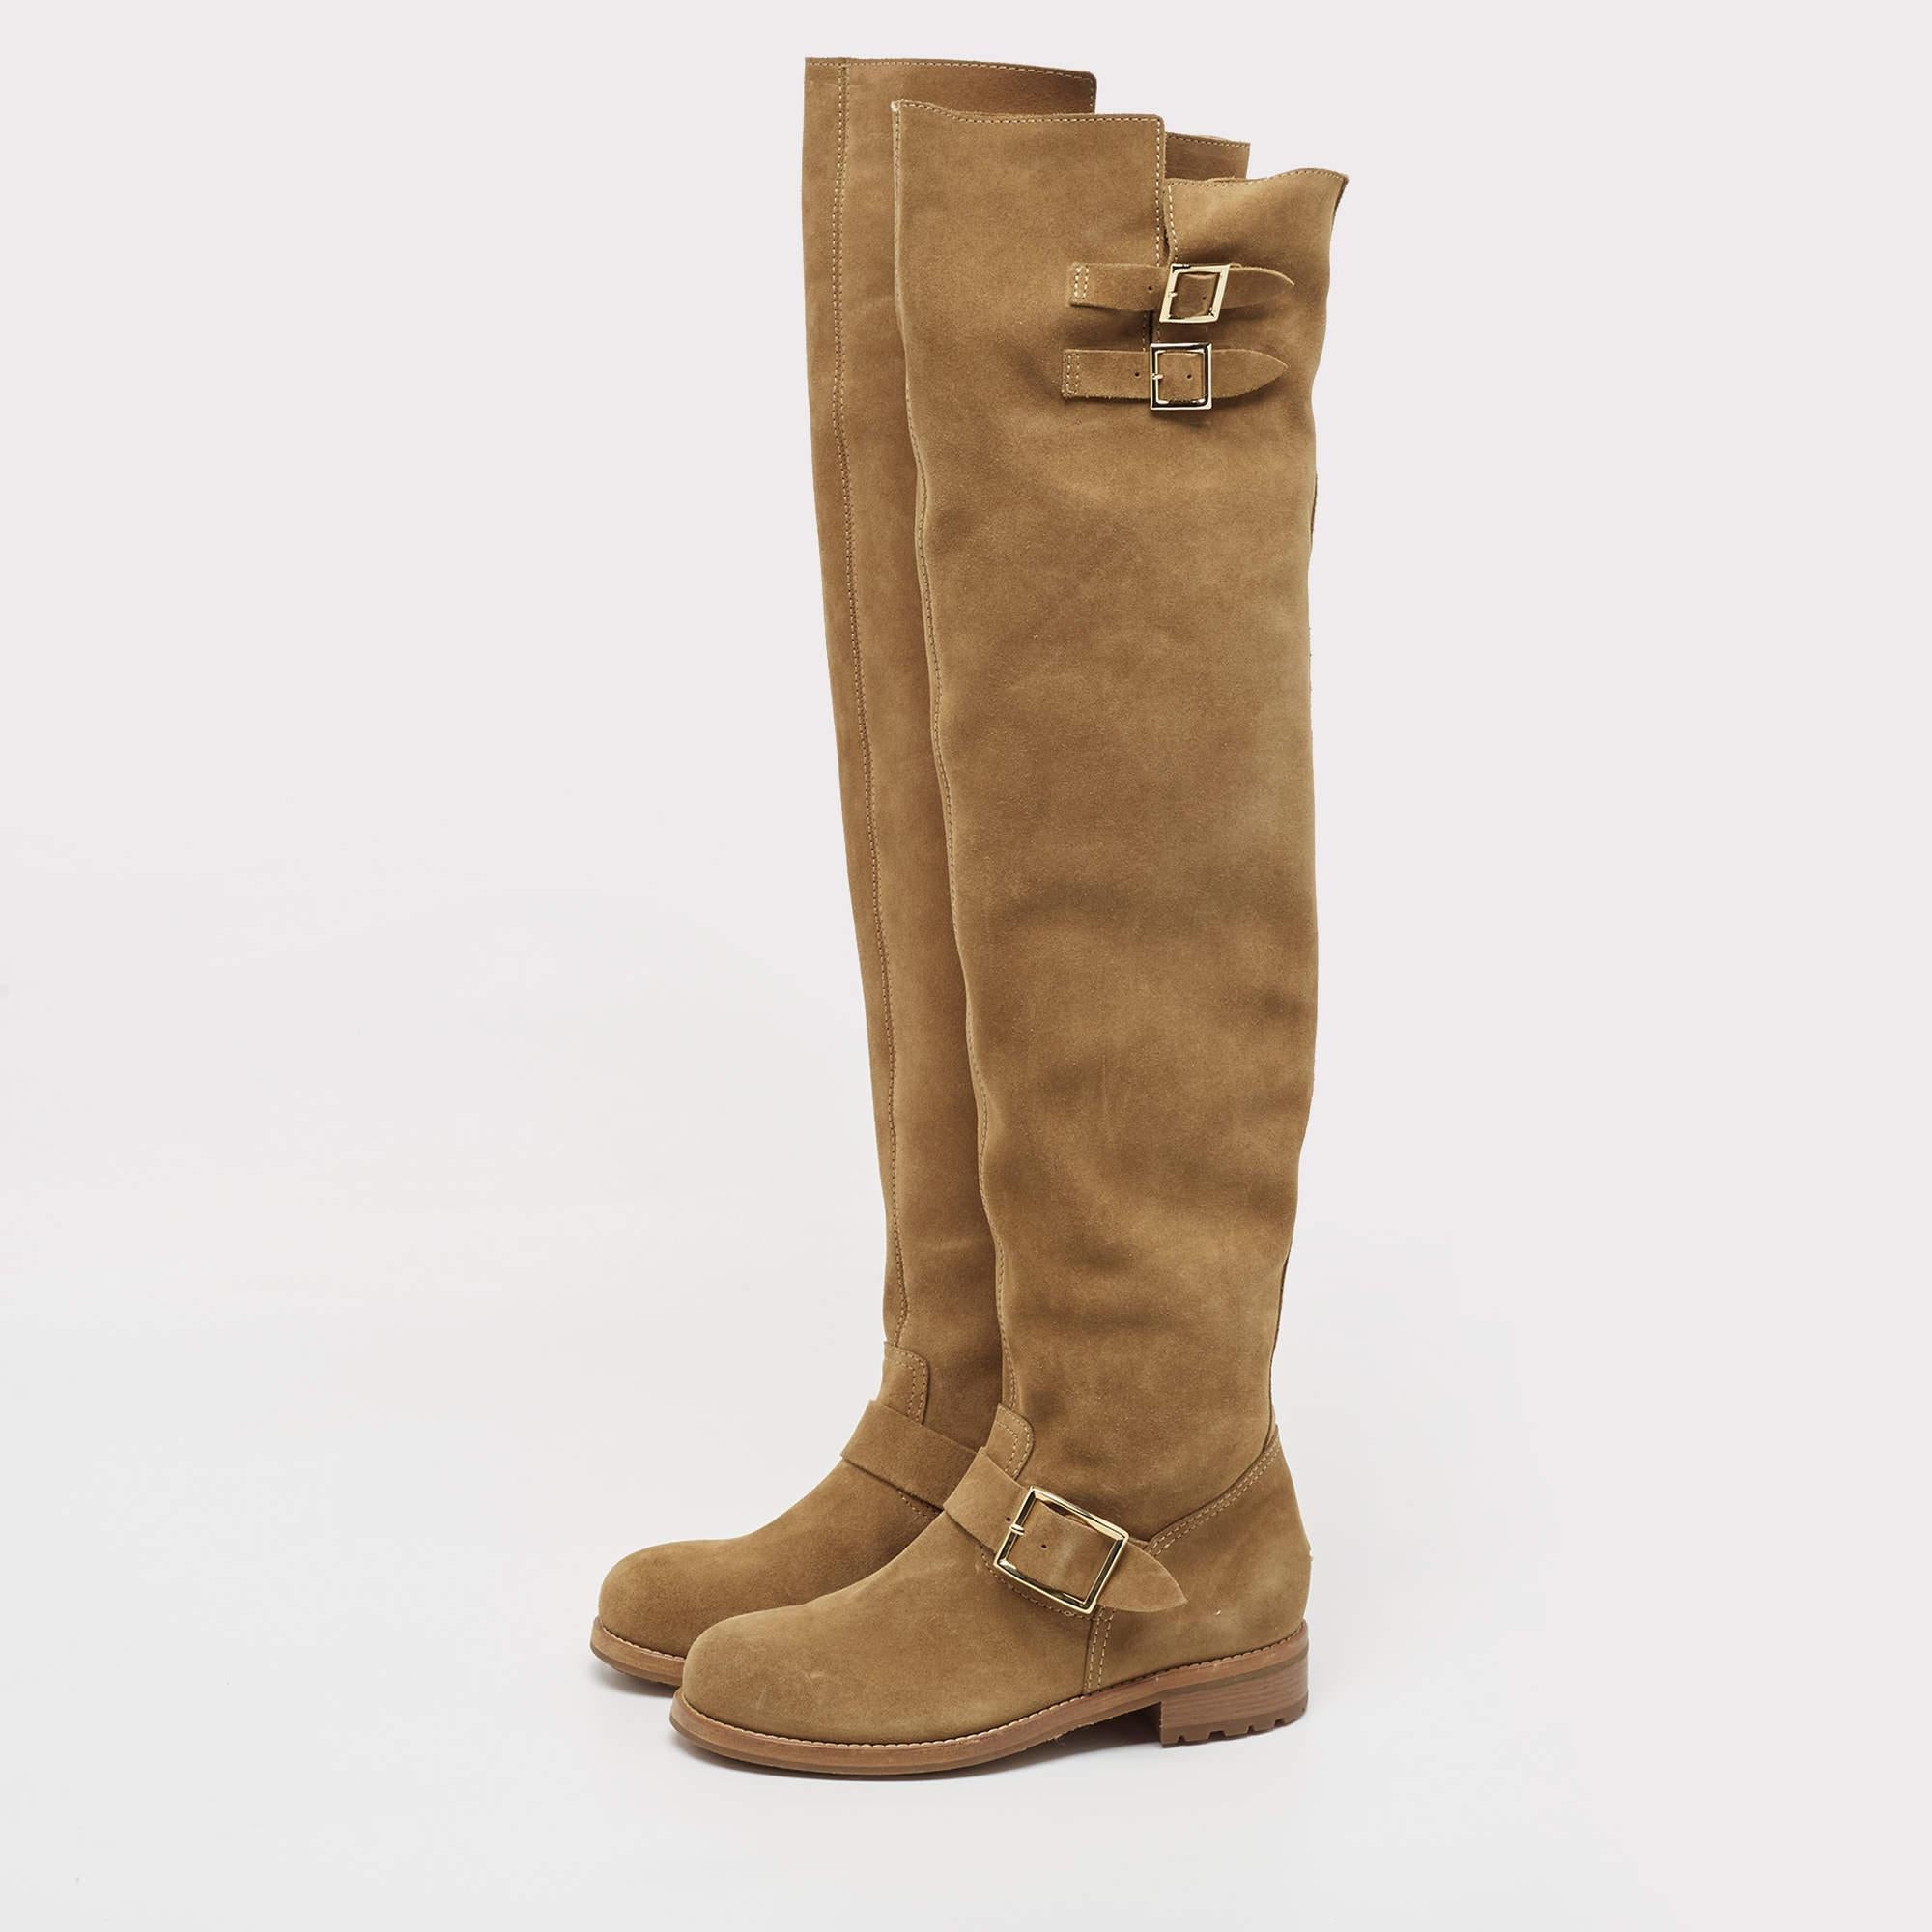 Jimmy Choo Brown Suede Yearn Buckle Over the Knee Boots Size 36 In New Condition For Sale In Dubai, Al Qouz 2